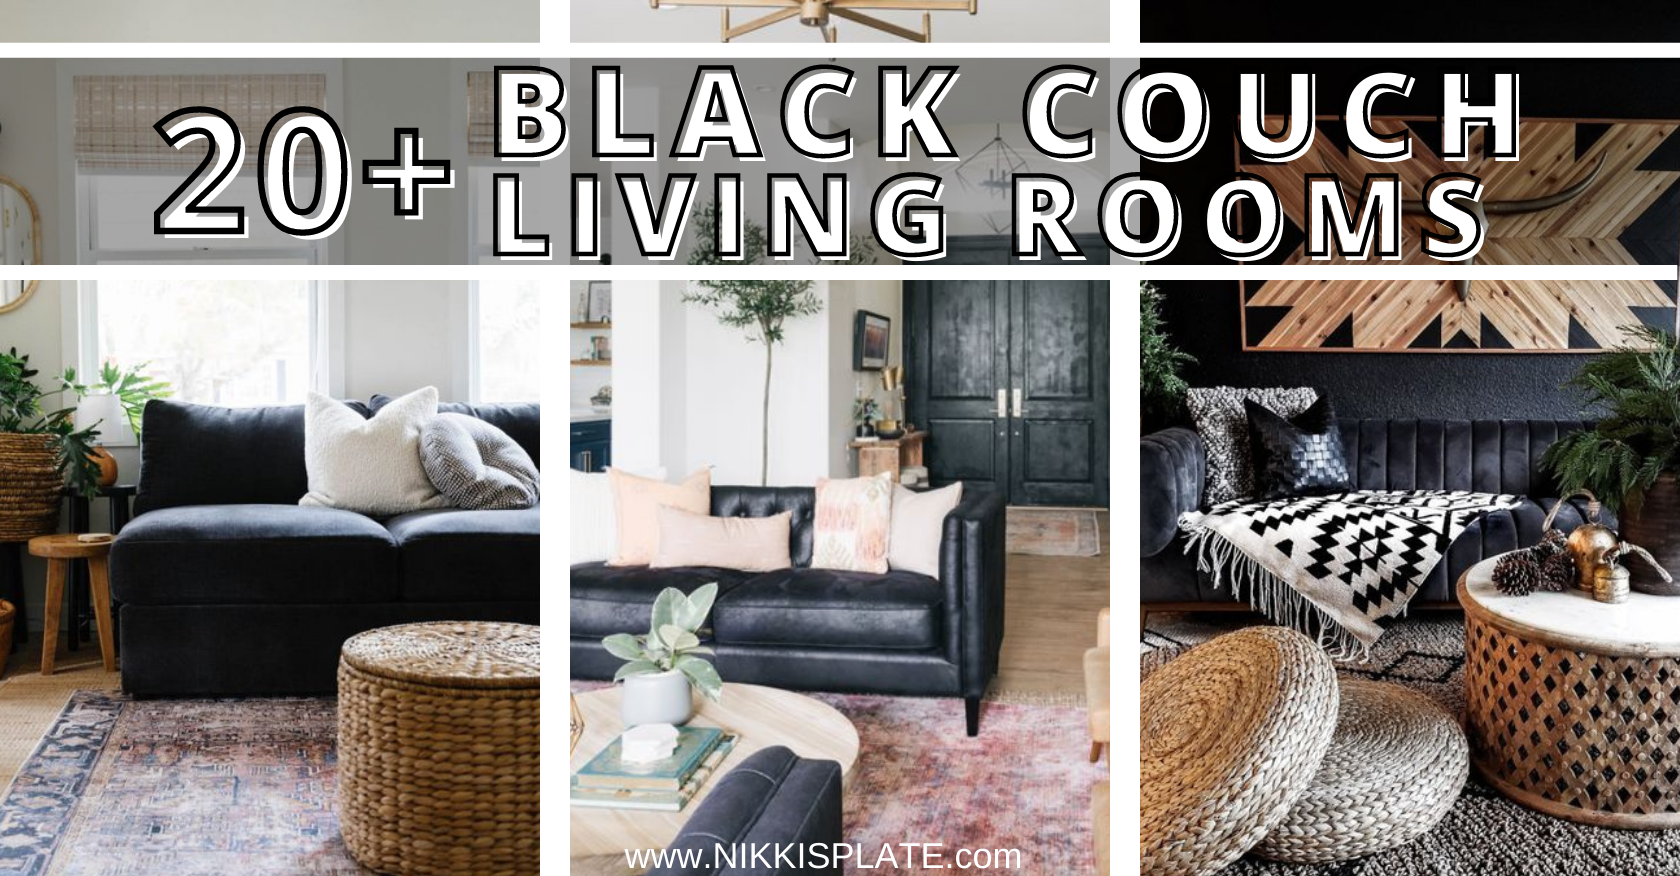 Beautiful Black Couch Living Room Ideas 